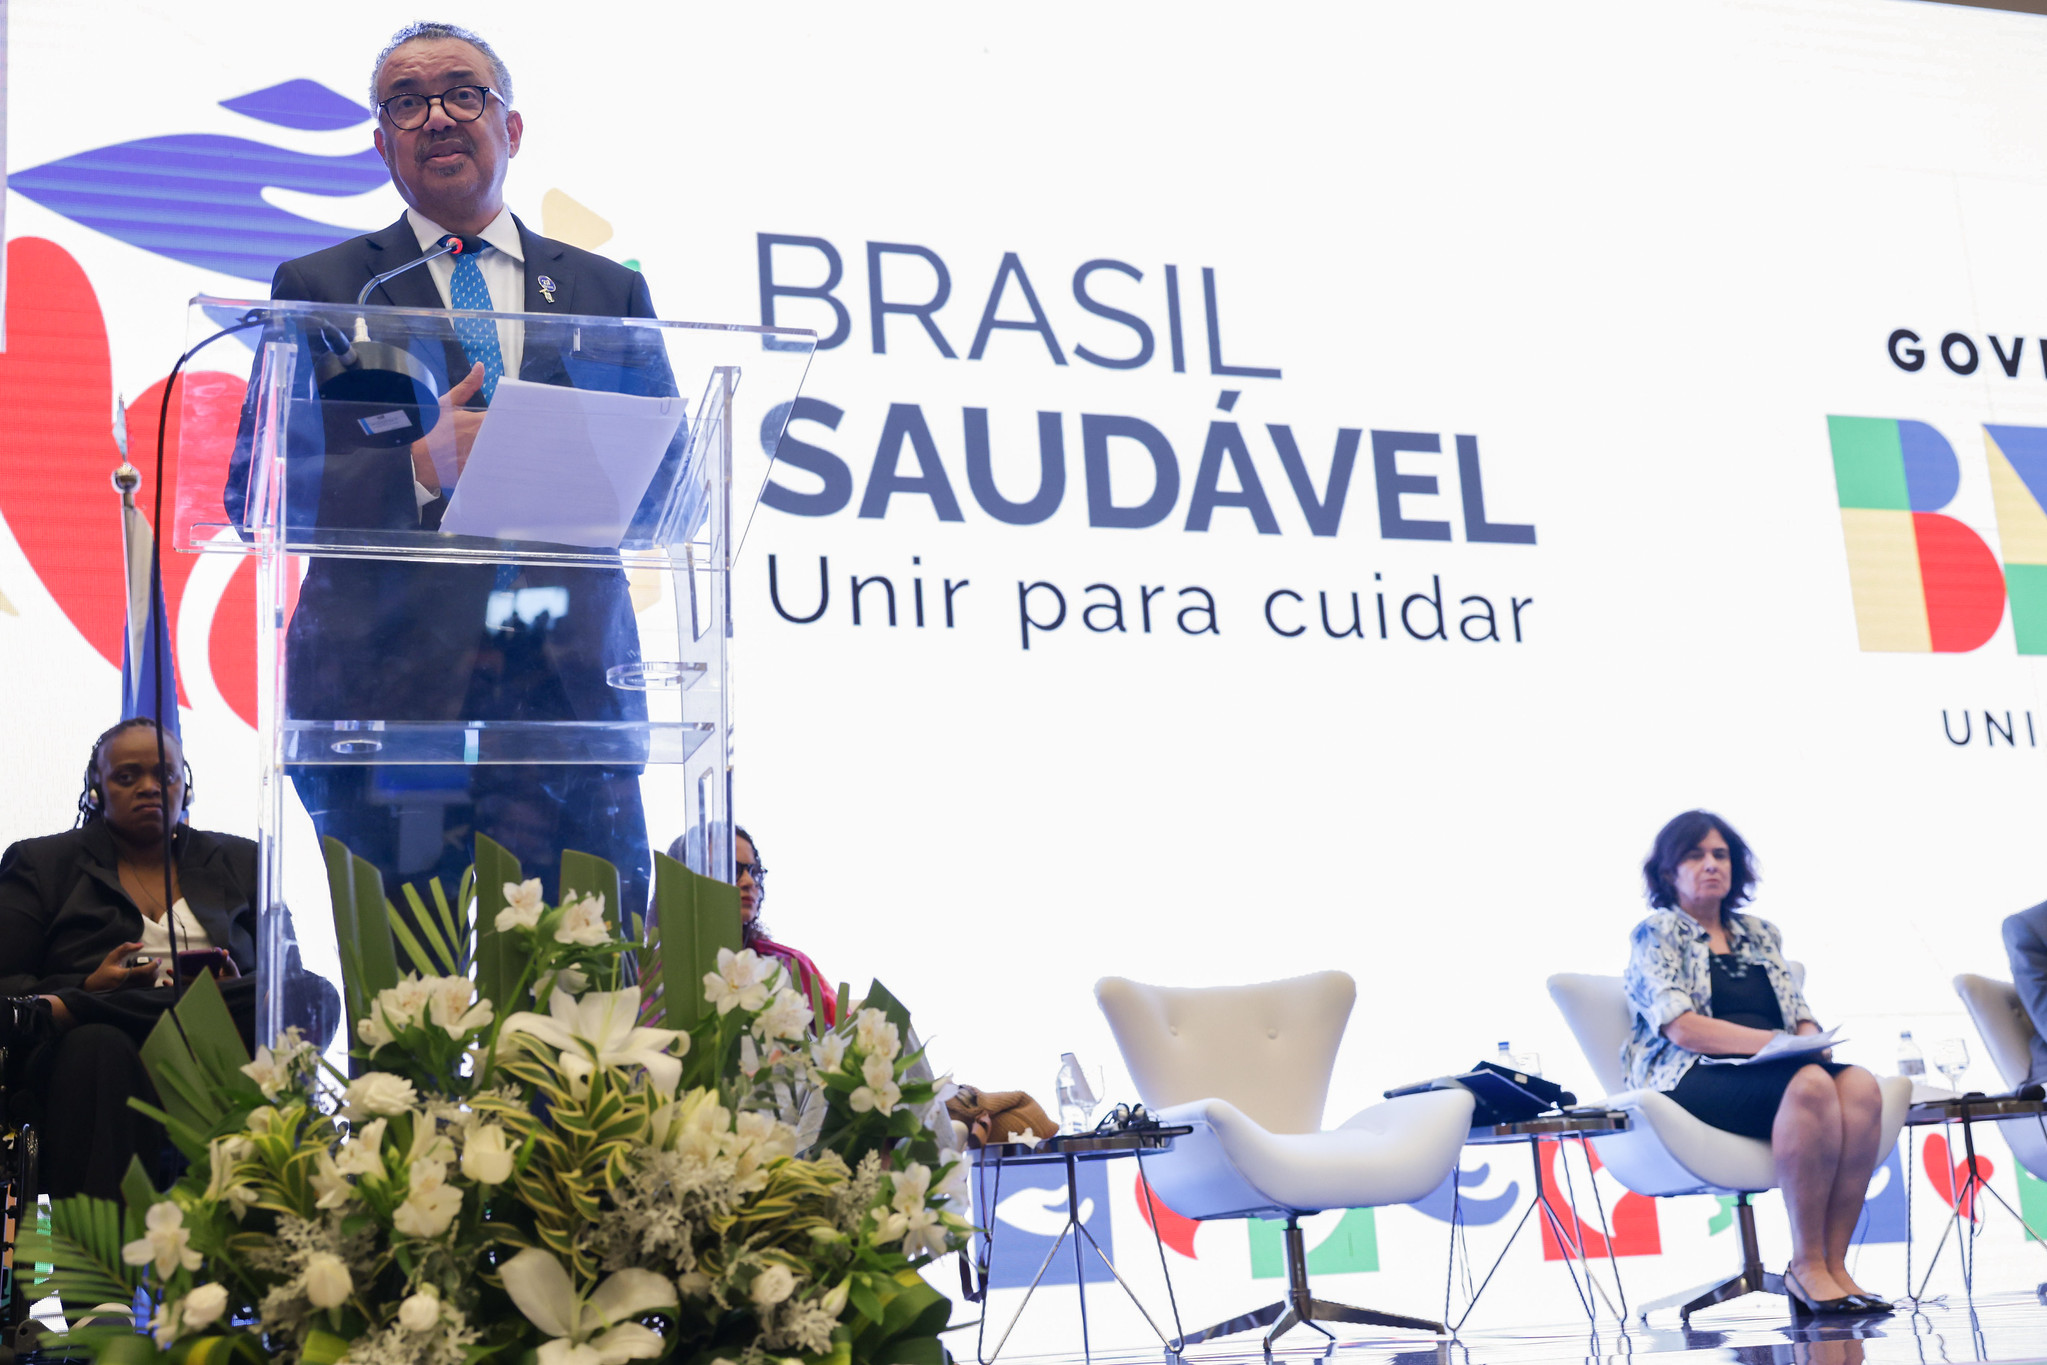 Tedros Adhanom, Director-General of the WHO, during the launch ceremony of the National Program for the Elimination of Socially Determined Diseases of the Brazilian Ministry of Health | Photo: Walterson Rosa/Ministry of Health